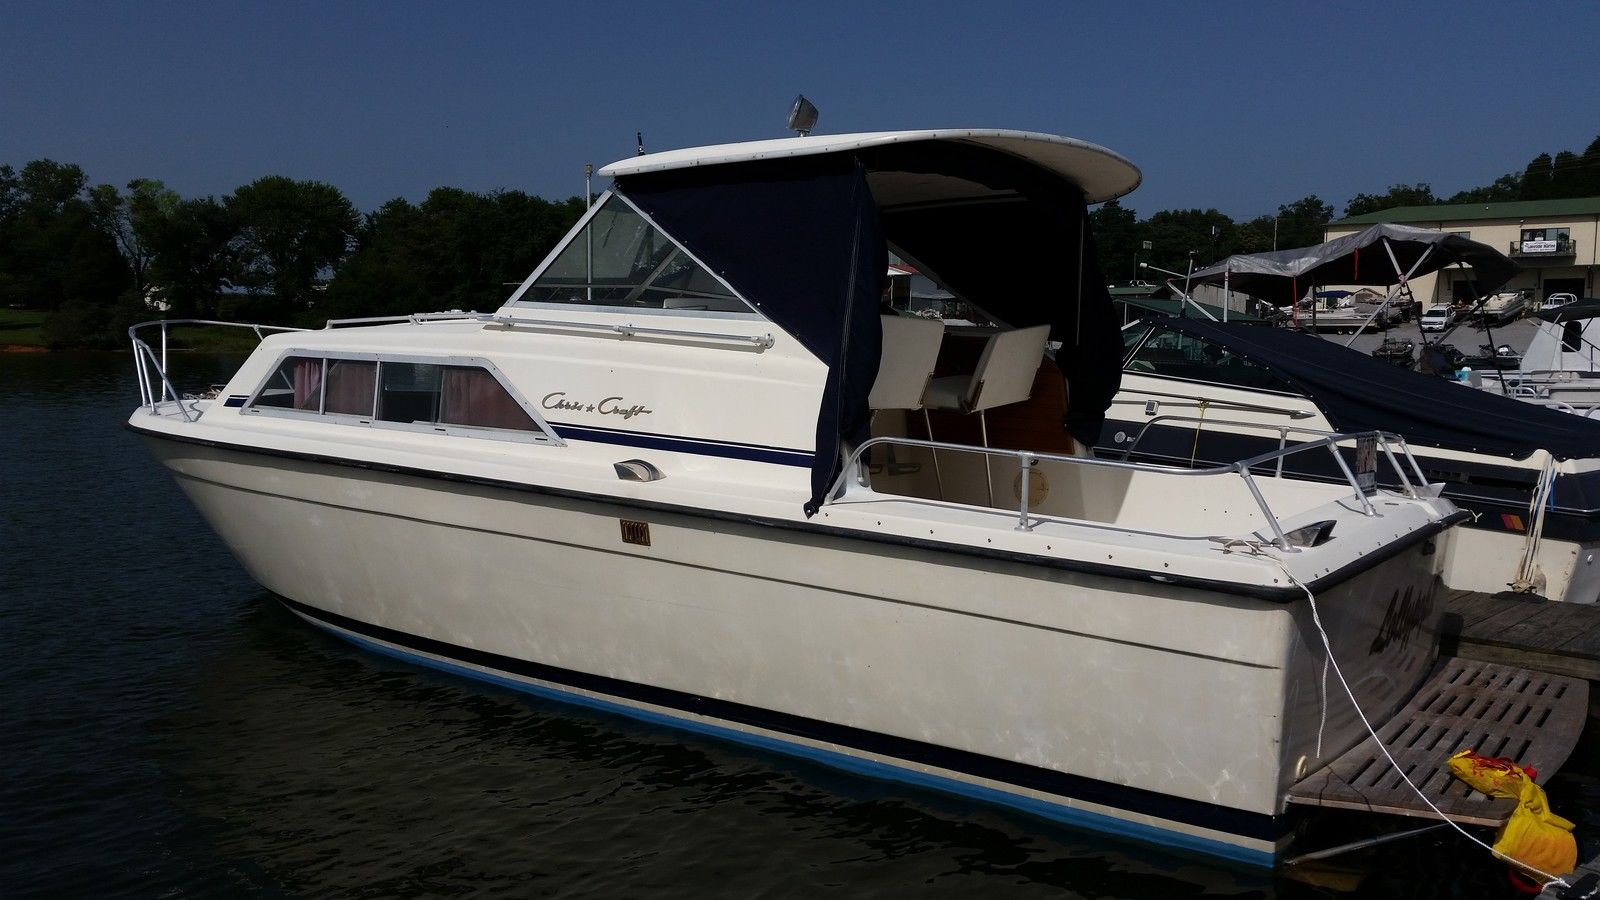 Chris Craft Cabin Cruiser 1979 for sale for $4,500 - Boats ...